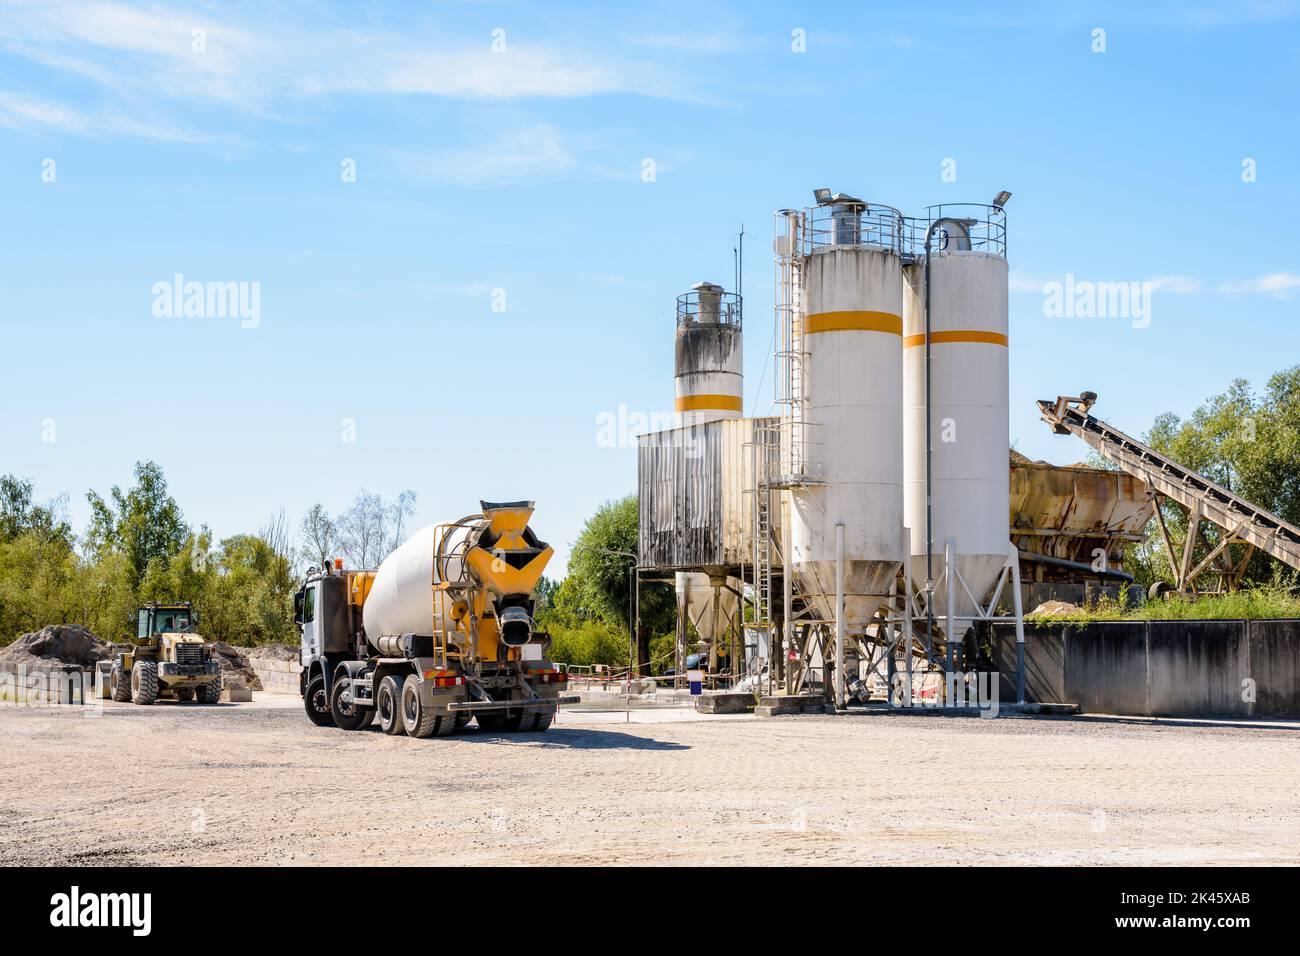 A concrete mixer truck and a wheel loader are parked next to sand silos in a quarry on a sunny day. Stock Photo